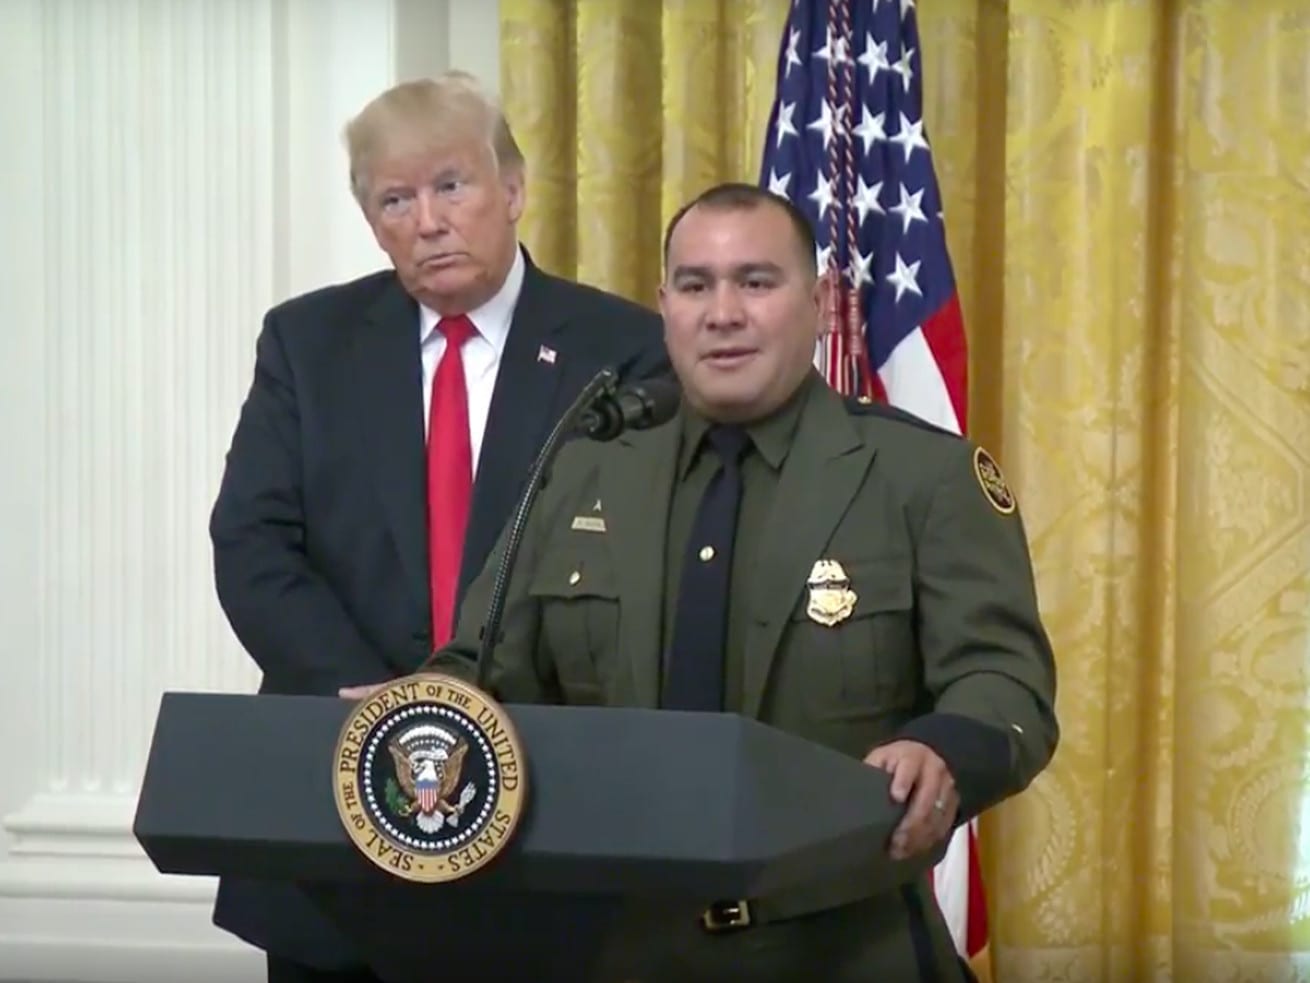 “Speaks perfect English”: Trump’s offensive praise of a Latino Border Patrol agent